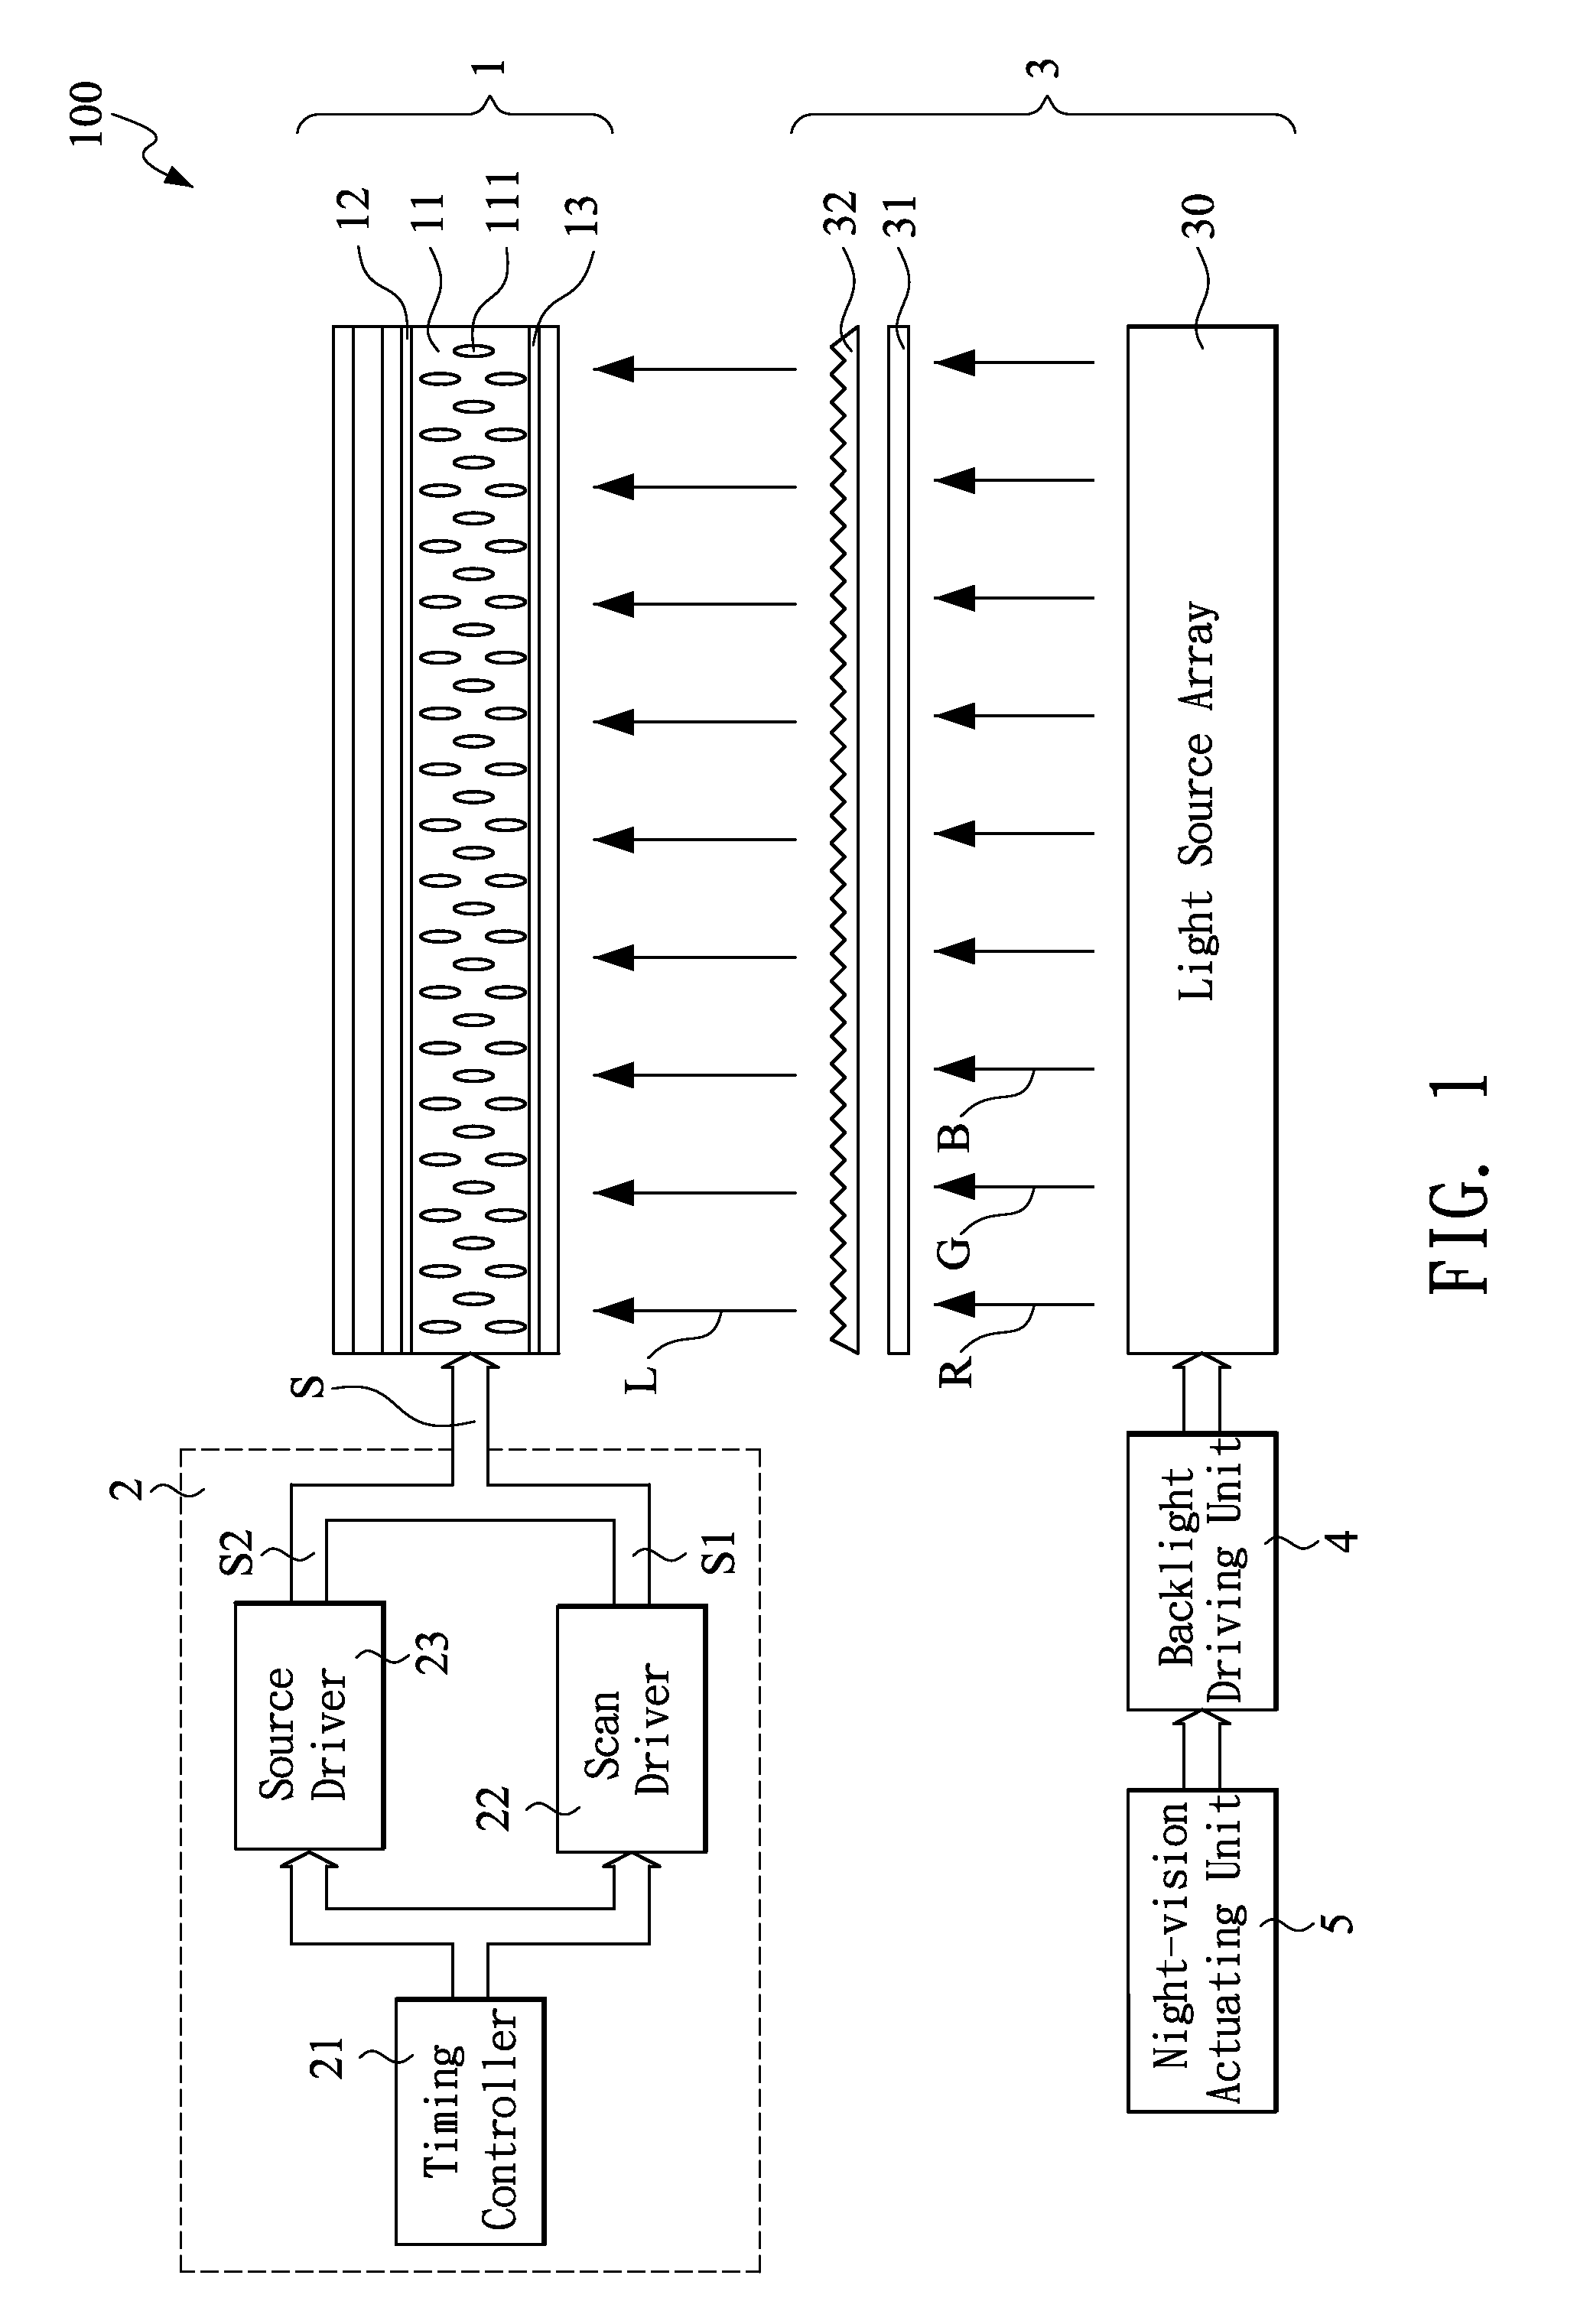 Flat display device blacklight module thereof for night vision imaging system